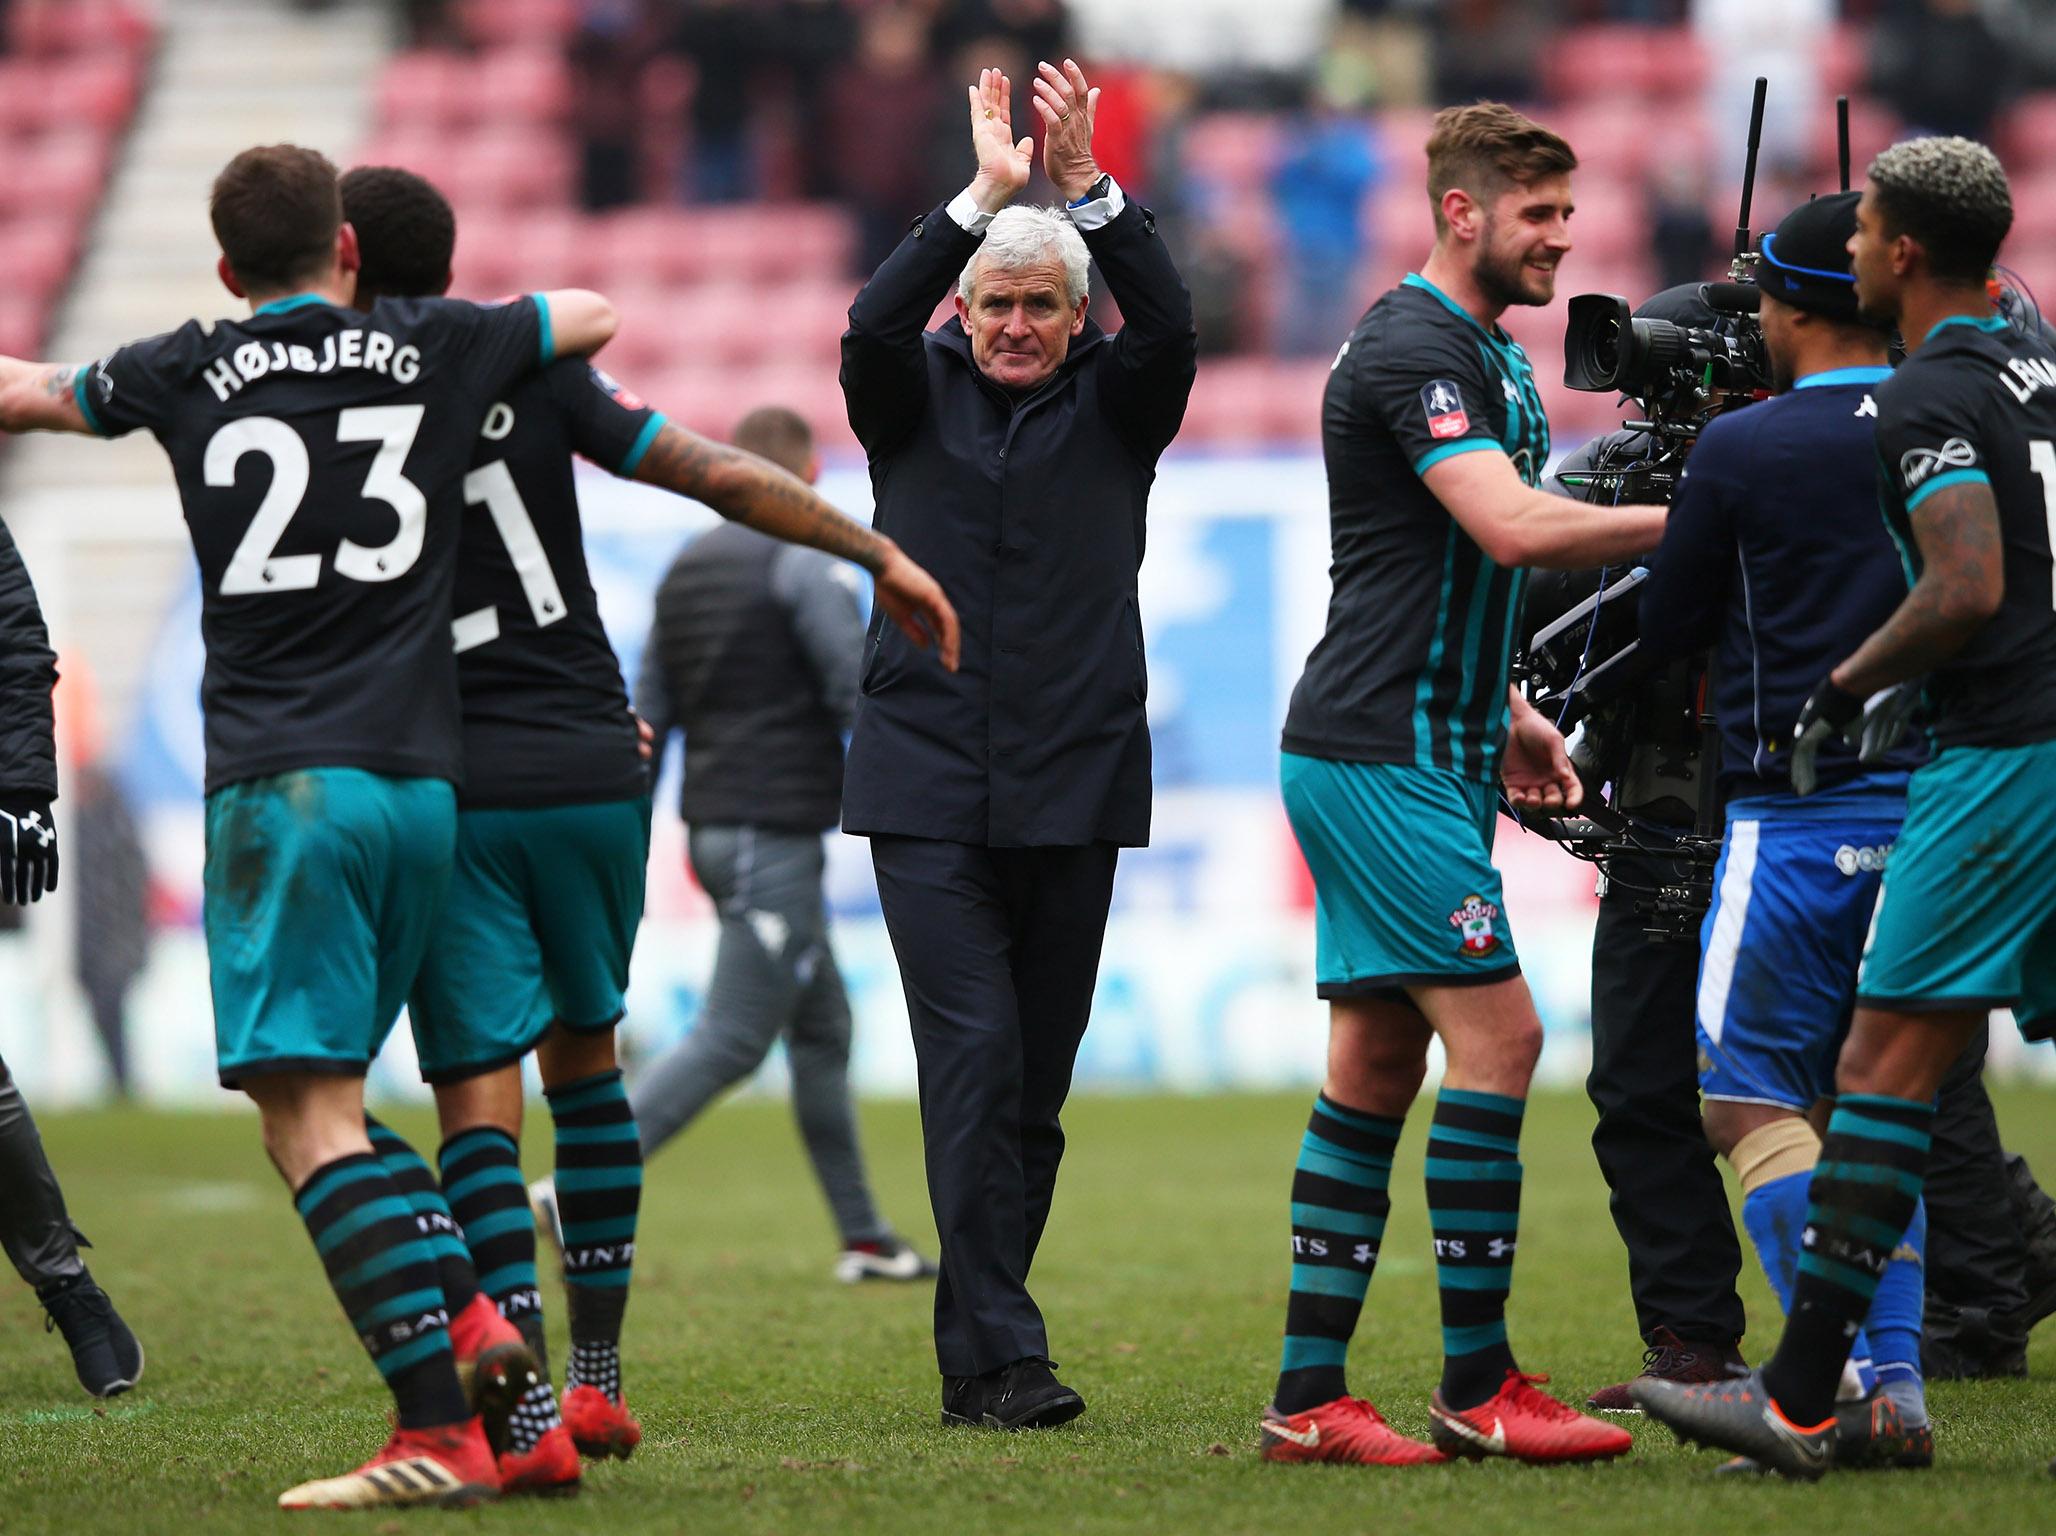 Mark Hughes applauds the Southampton supporters